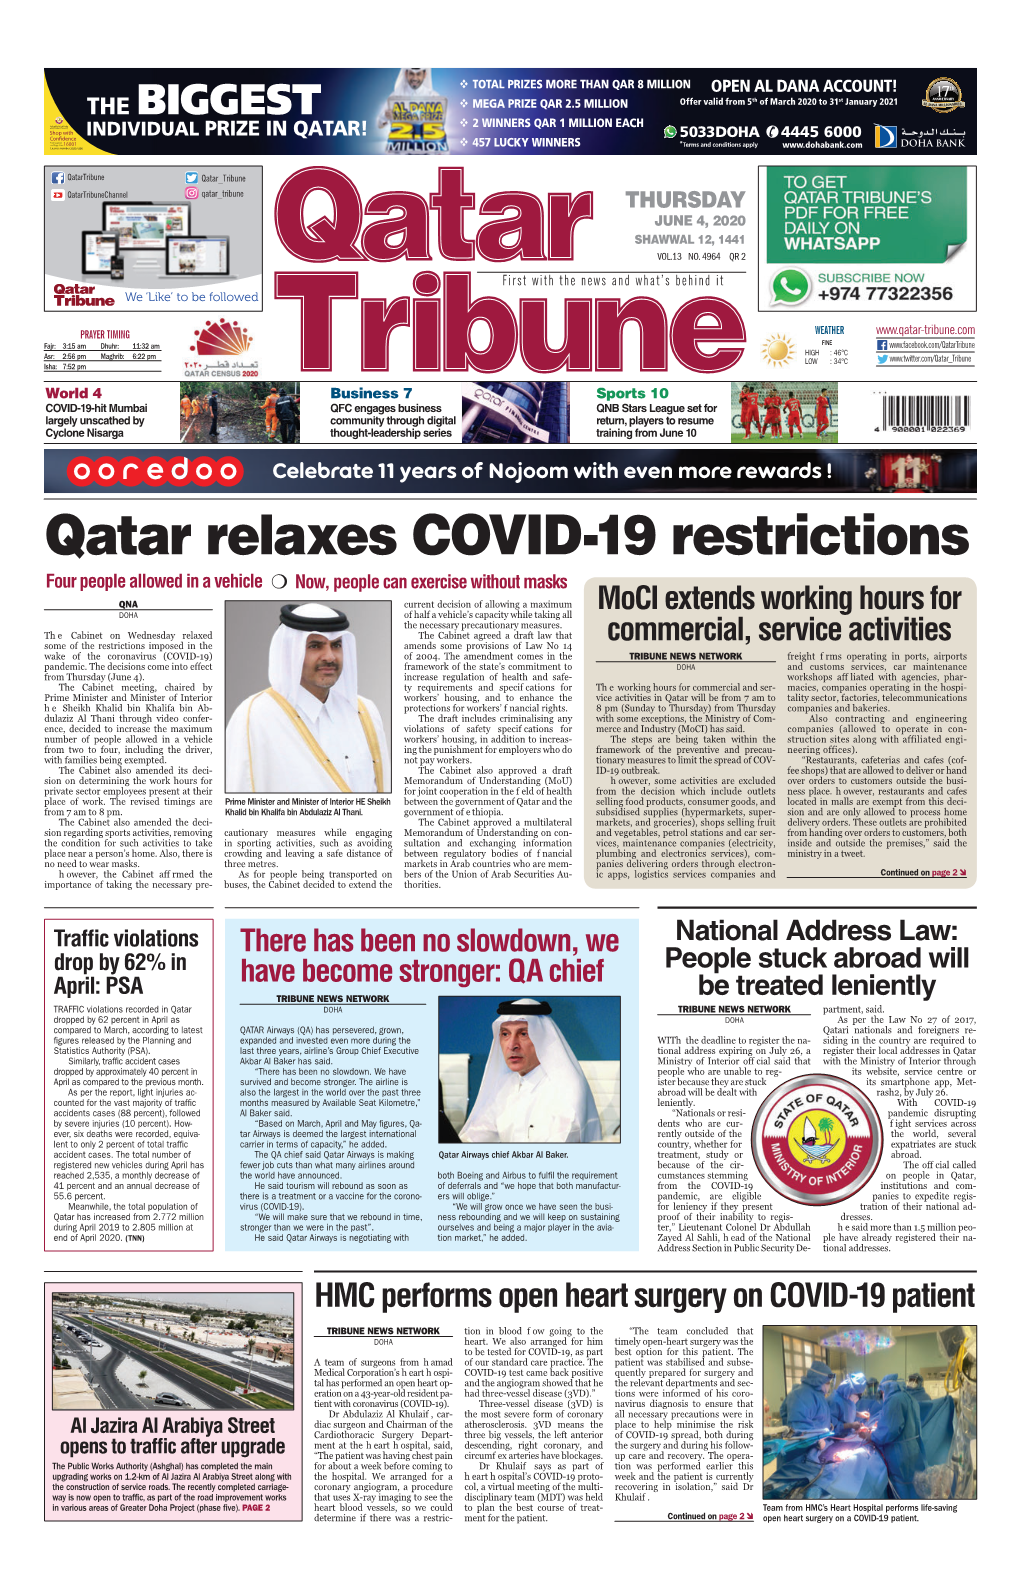 Qatar Relaxes COVID-19 Restrictions